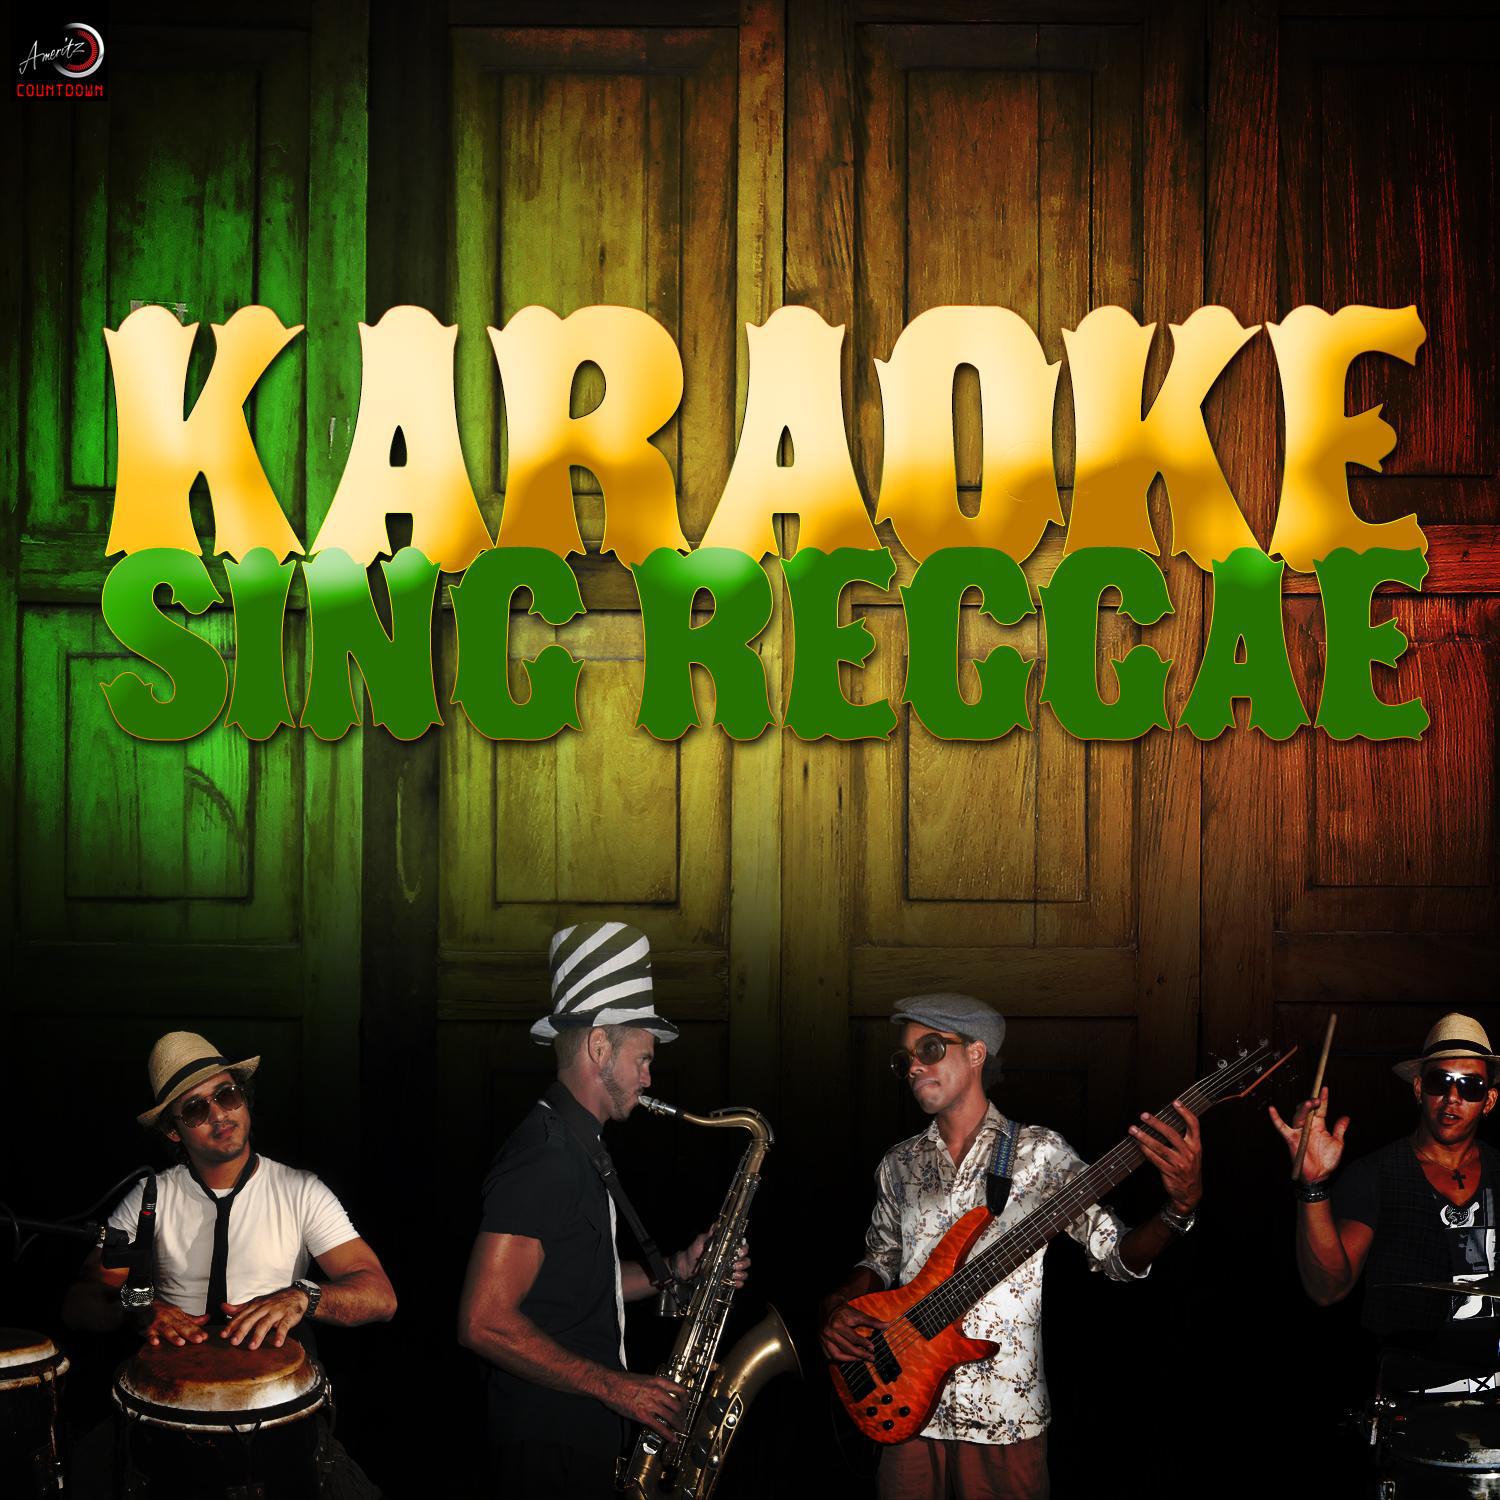 Dreadlock Holiday (In the Style of 10cc) [Karaoke Version]